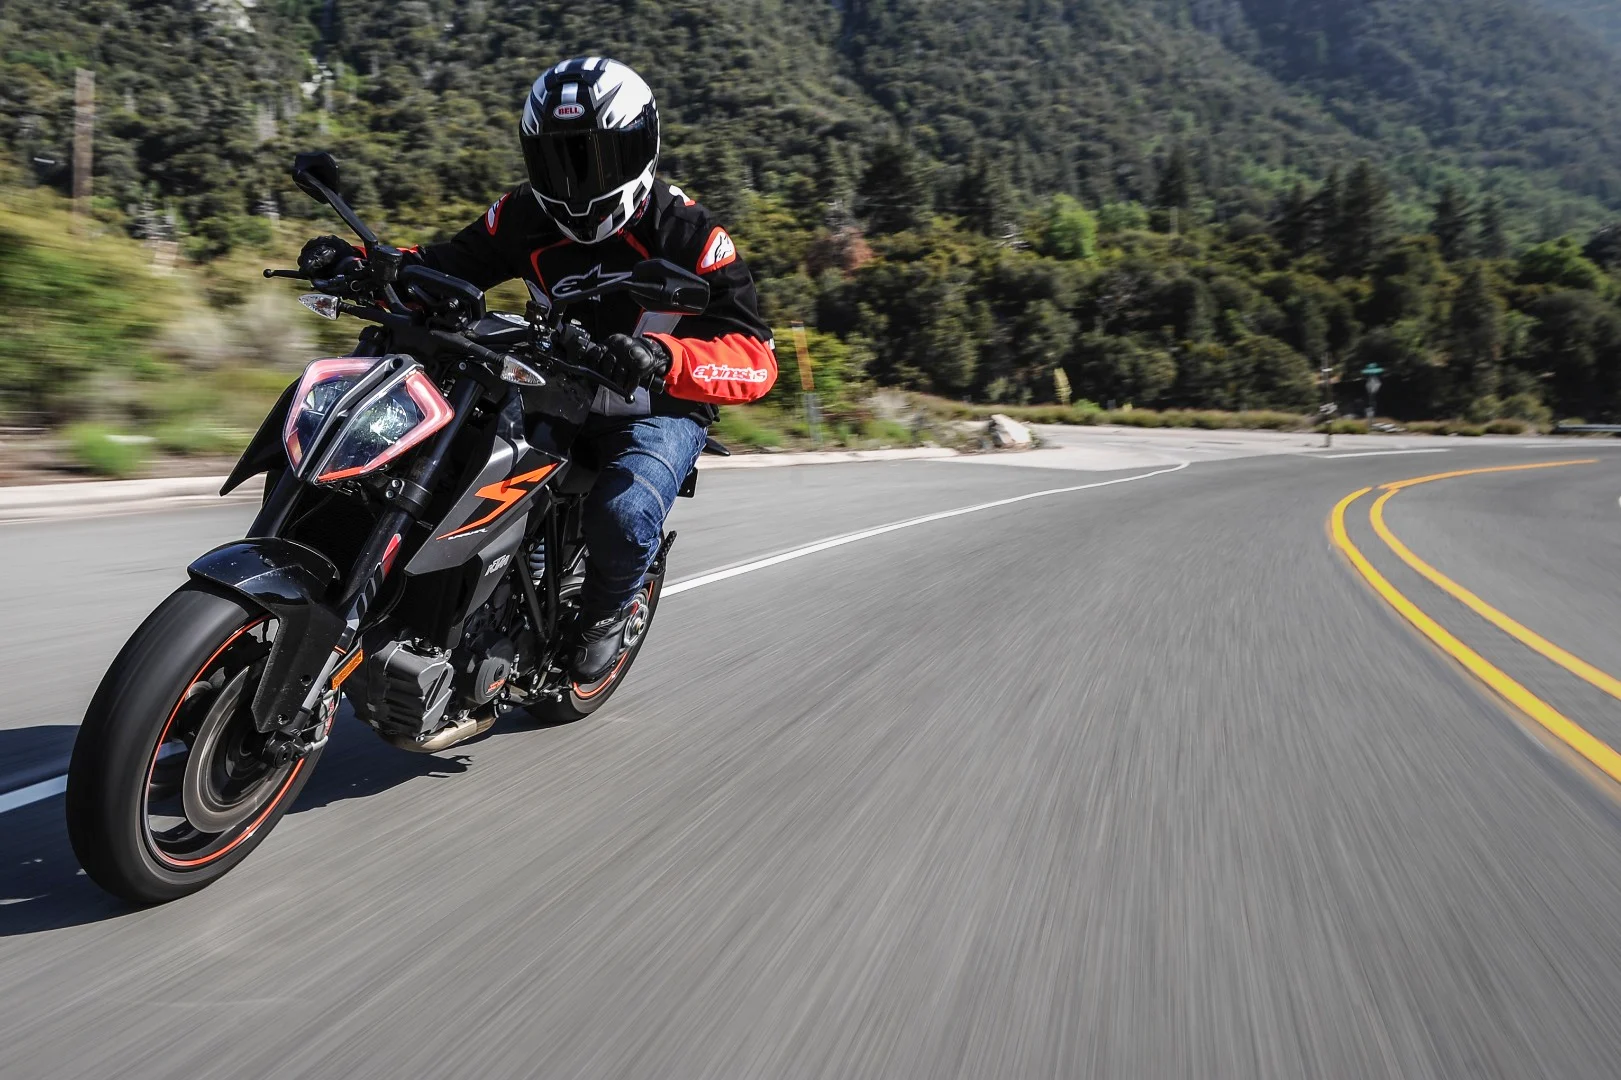 Rider pushes limits on 2018 KTM 1290 Super Duke along the highway